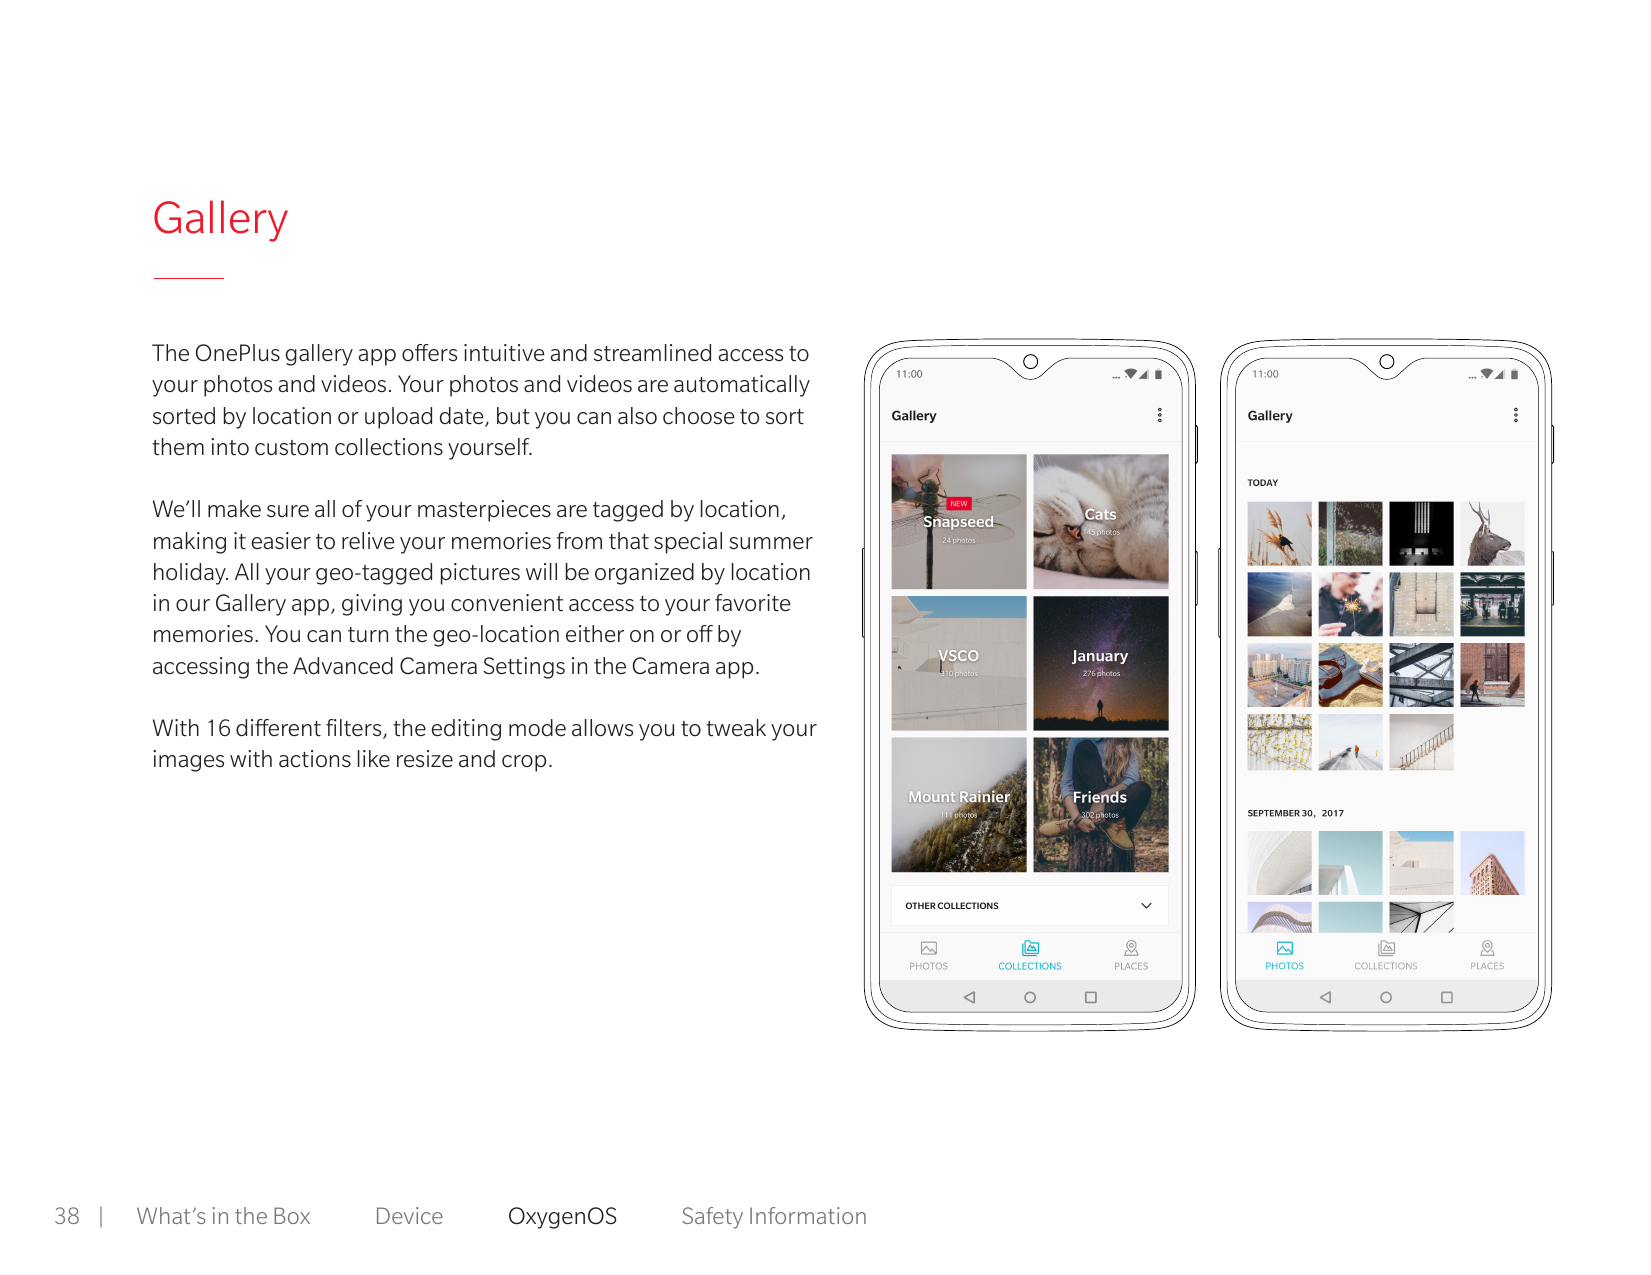 GalleryThe OnePlus gallery app offers intuitive and streamlined access toyour photos and videos. Your photos and videos are auto